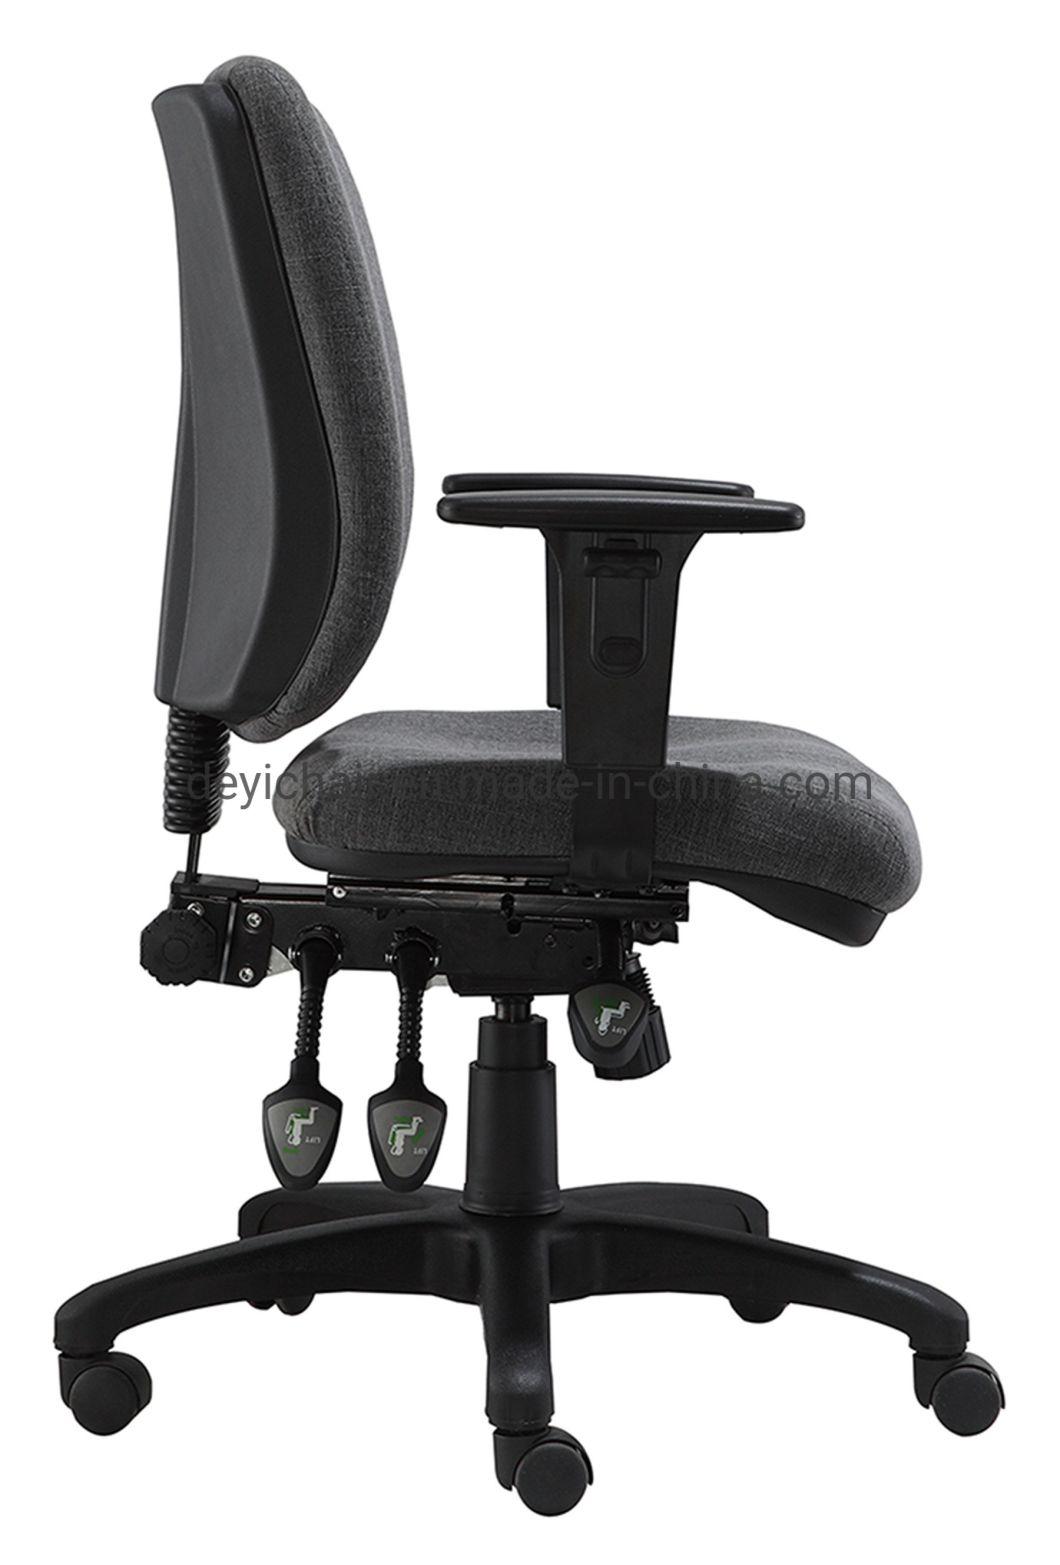 Middle Back Plastic Cover PU Surface Adjustable Arm Fabric Upholstery Functional Computer Office Chair